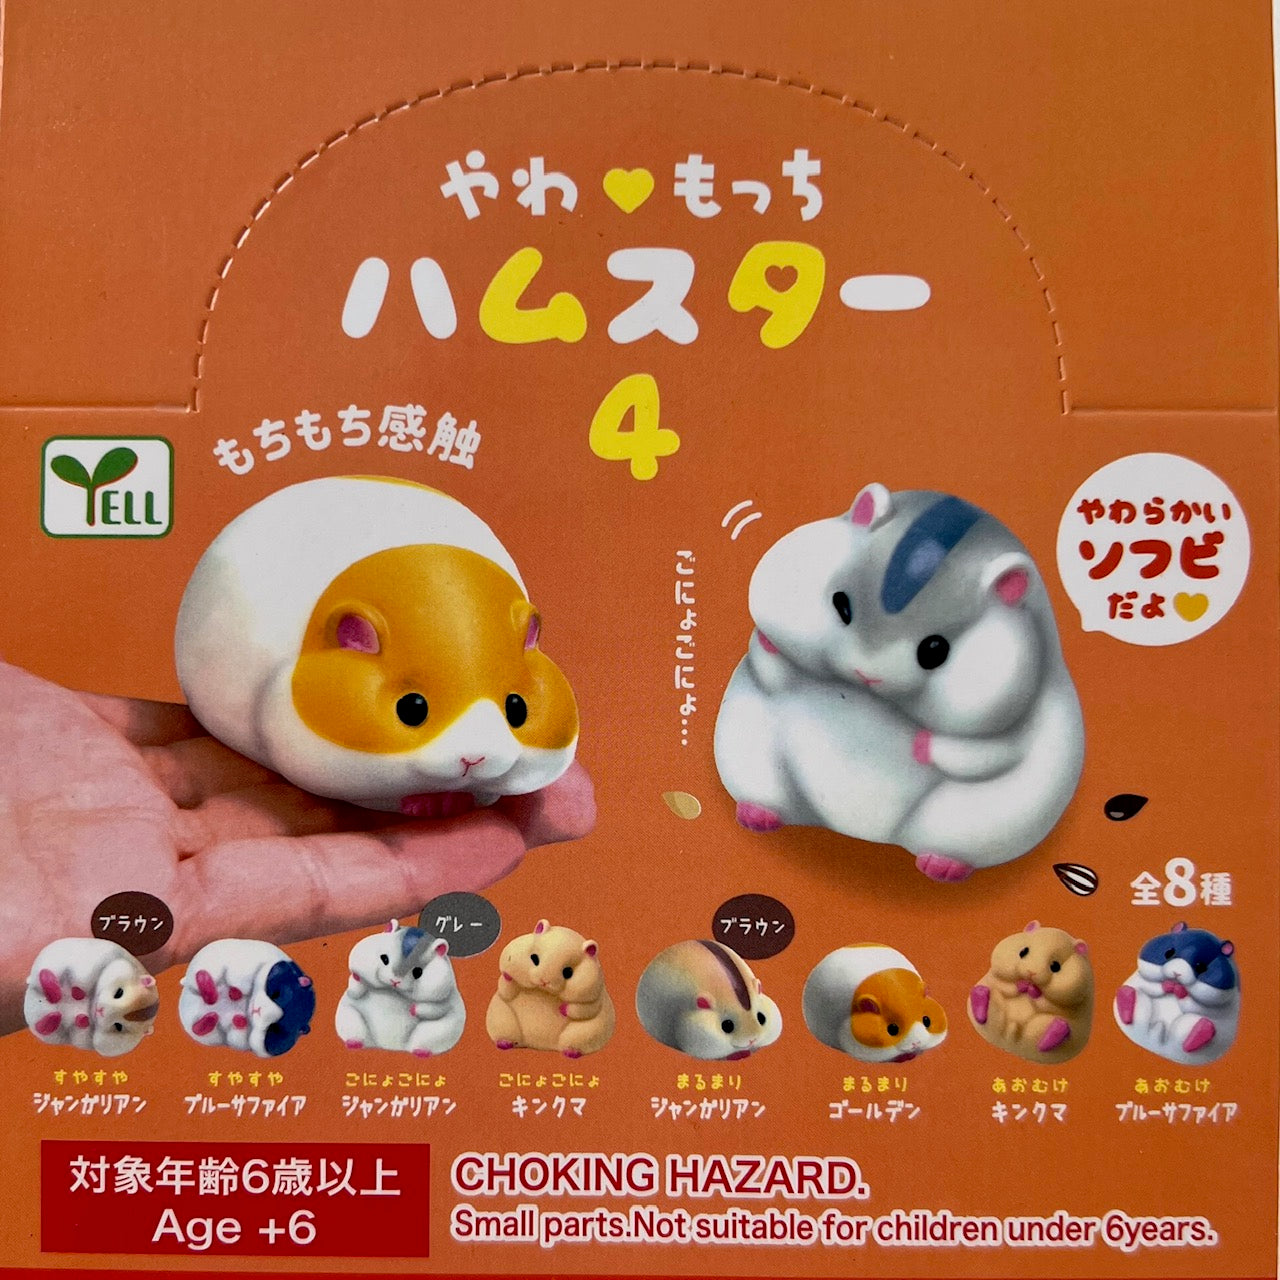 X 70761 SOFT HAMSTERS BLIND BOX-DISCONTINUED